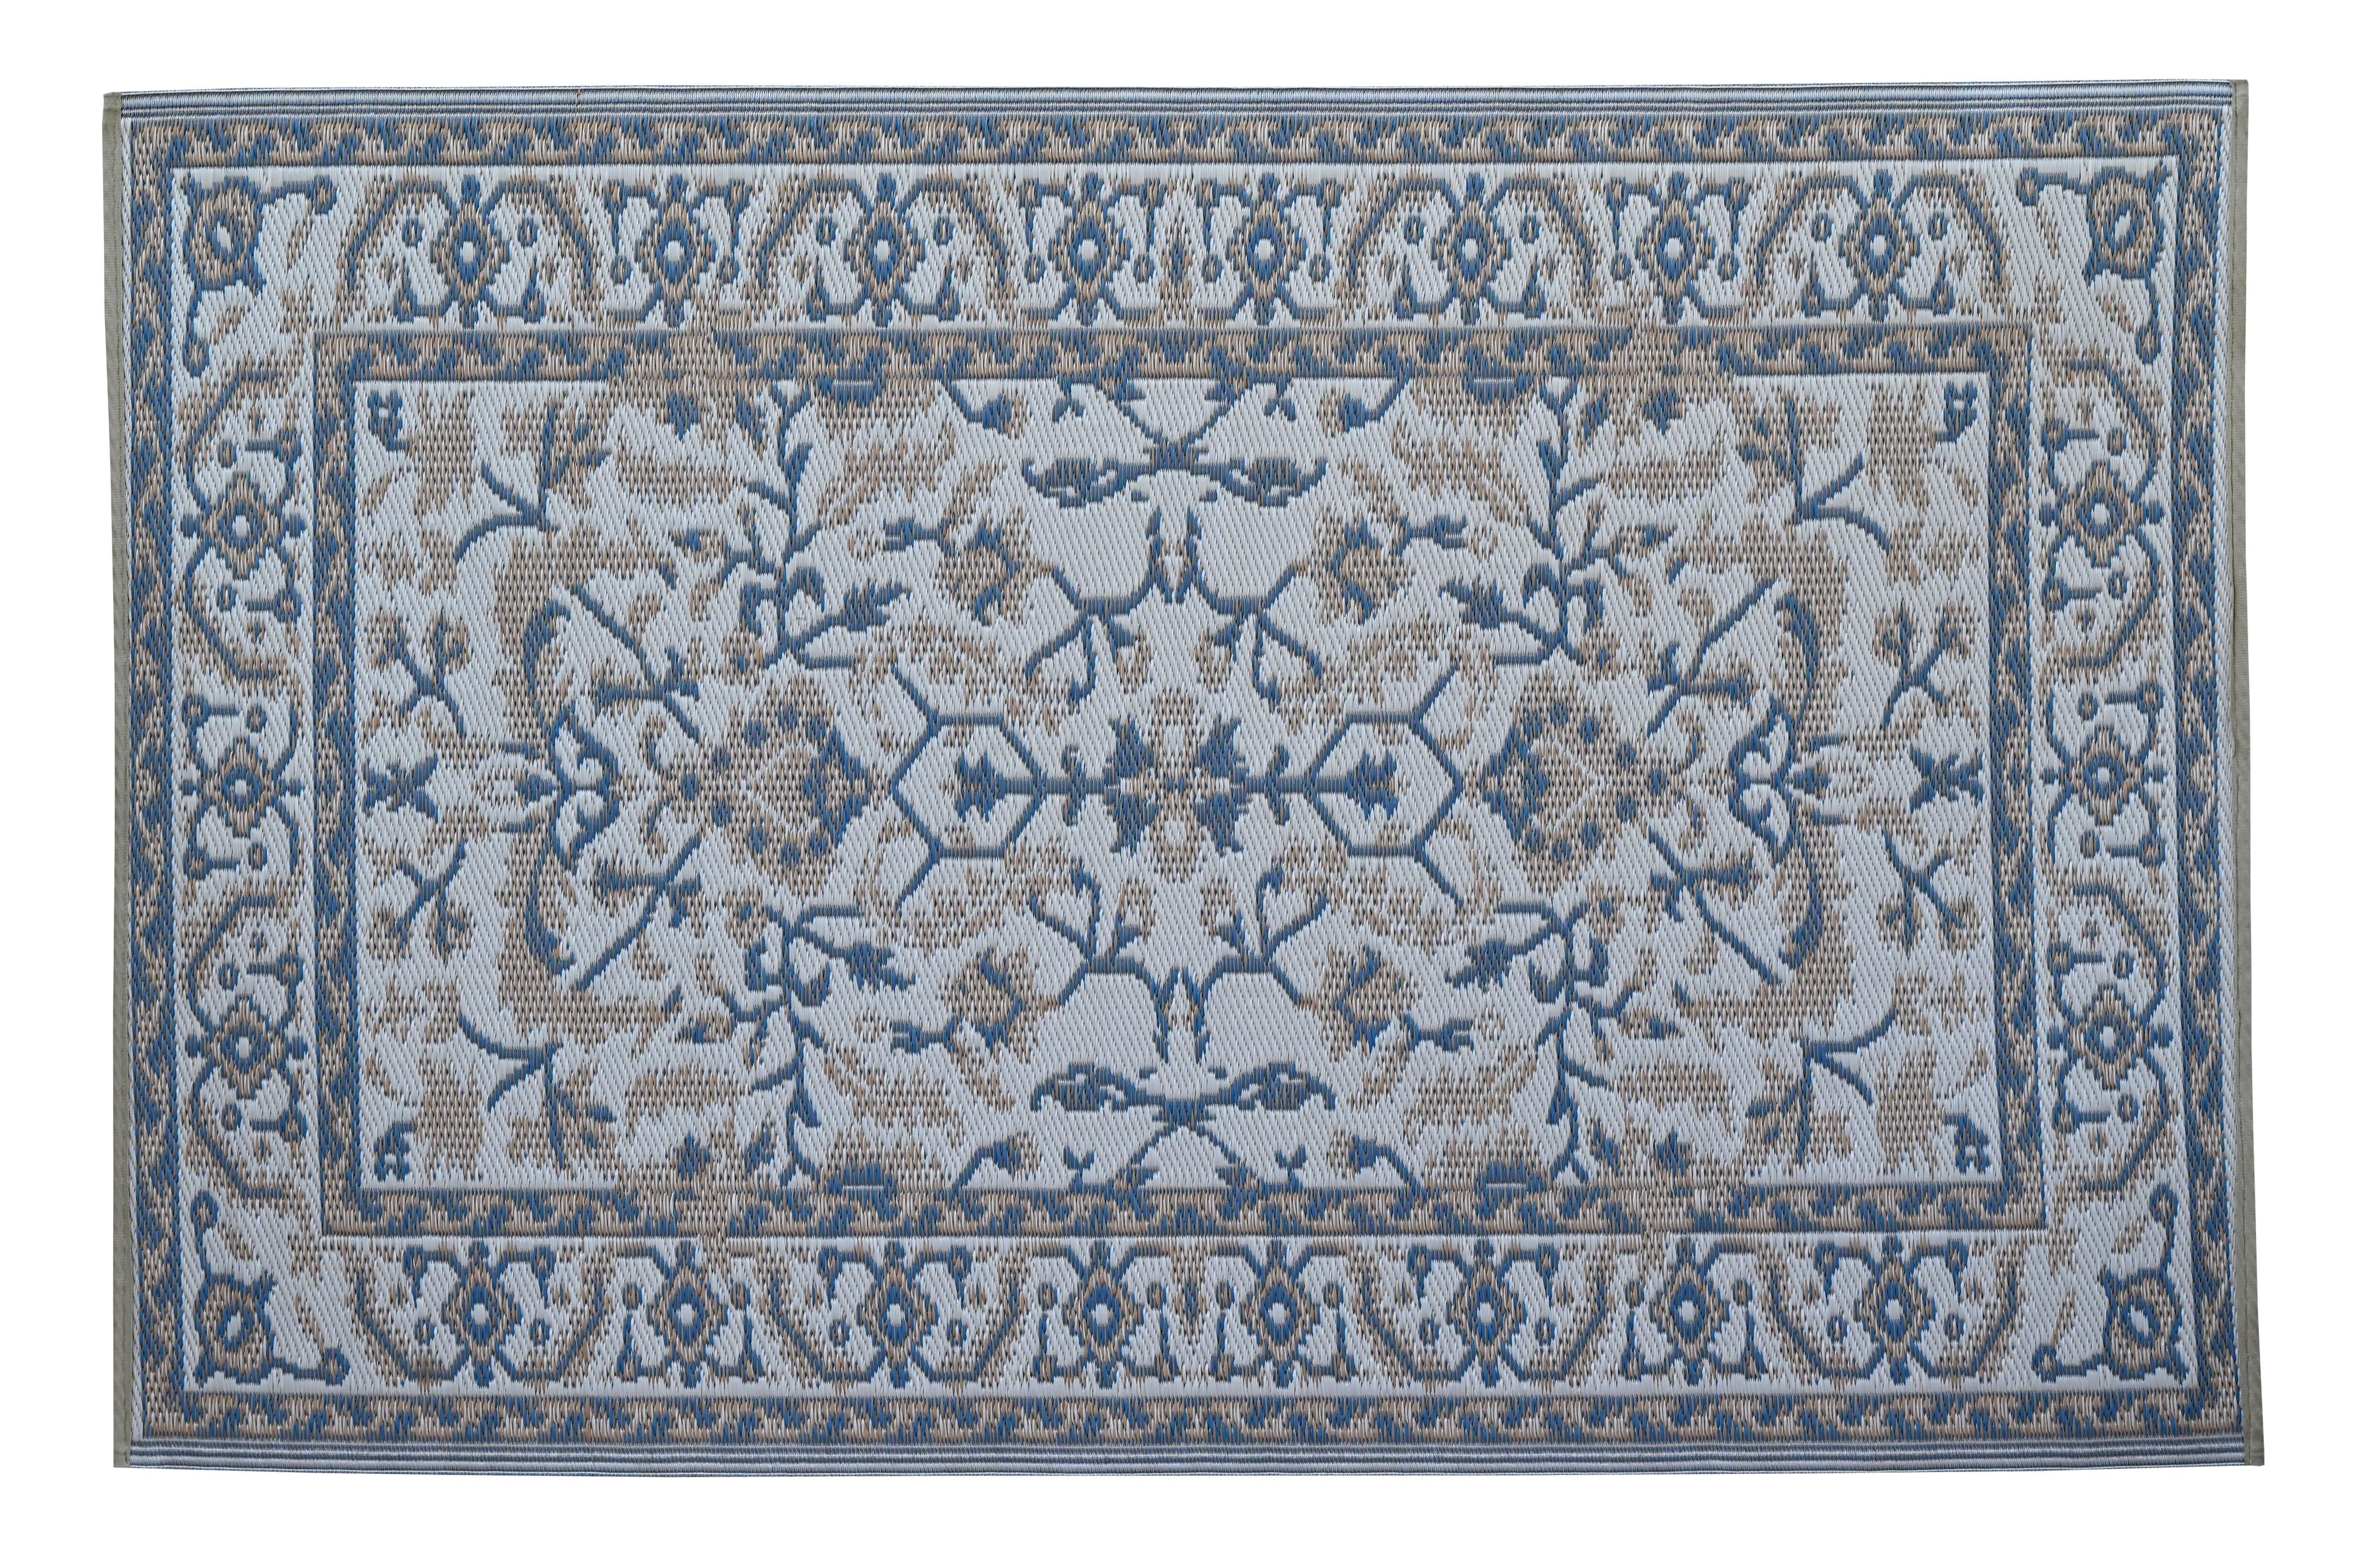 120x179cm Nain Blue Recycled Plastic Outdoor Rug